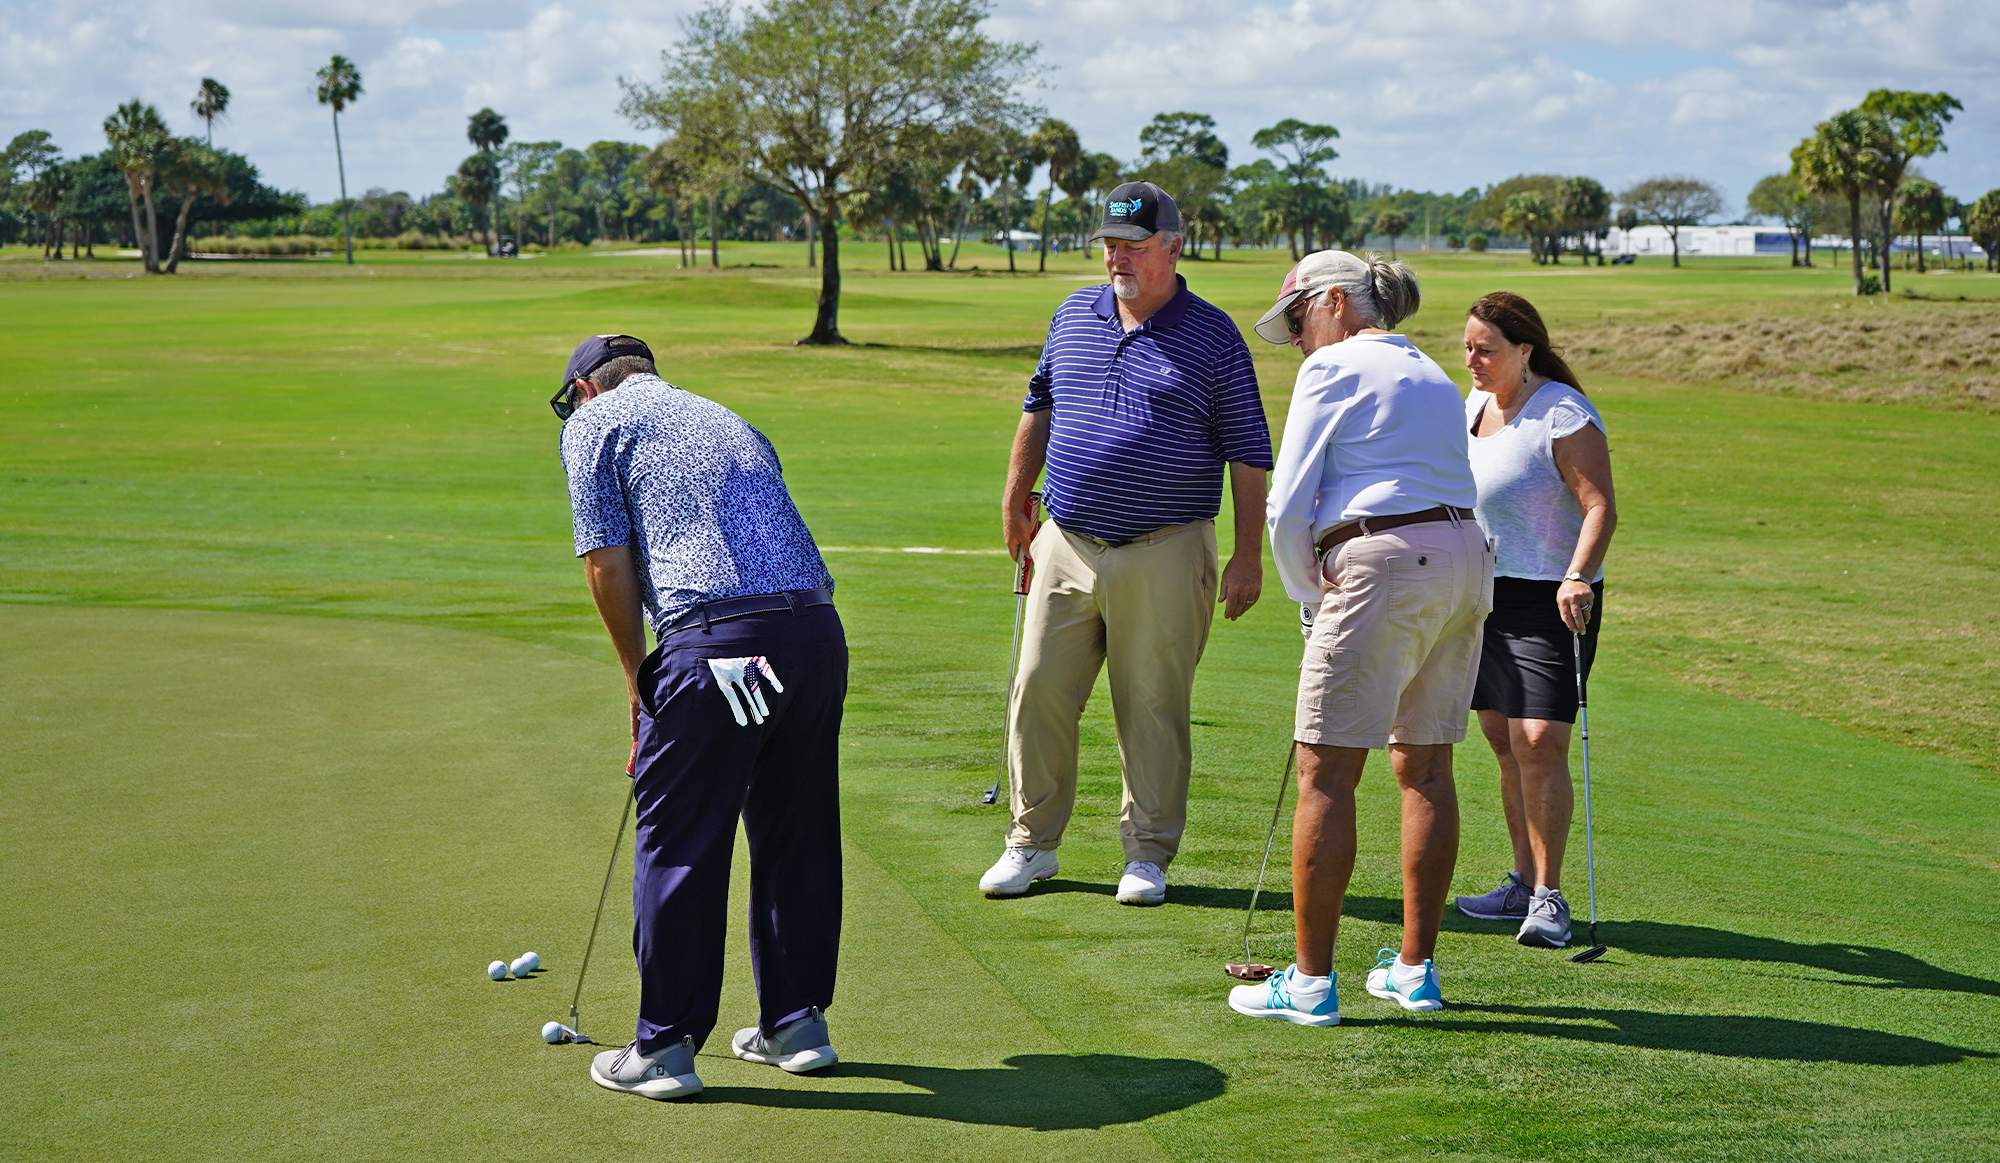 A group of golfers getting a lesson from a golf professional